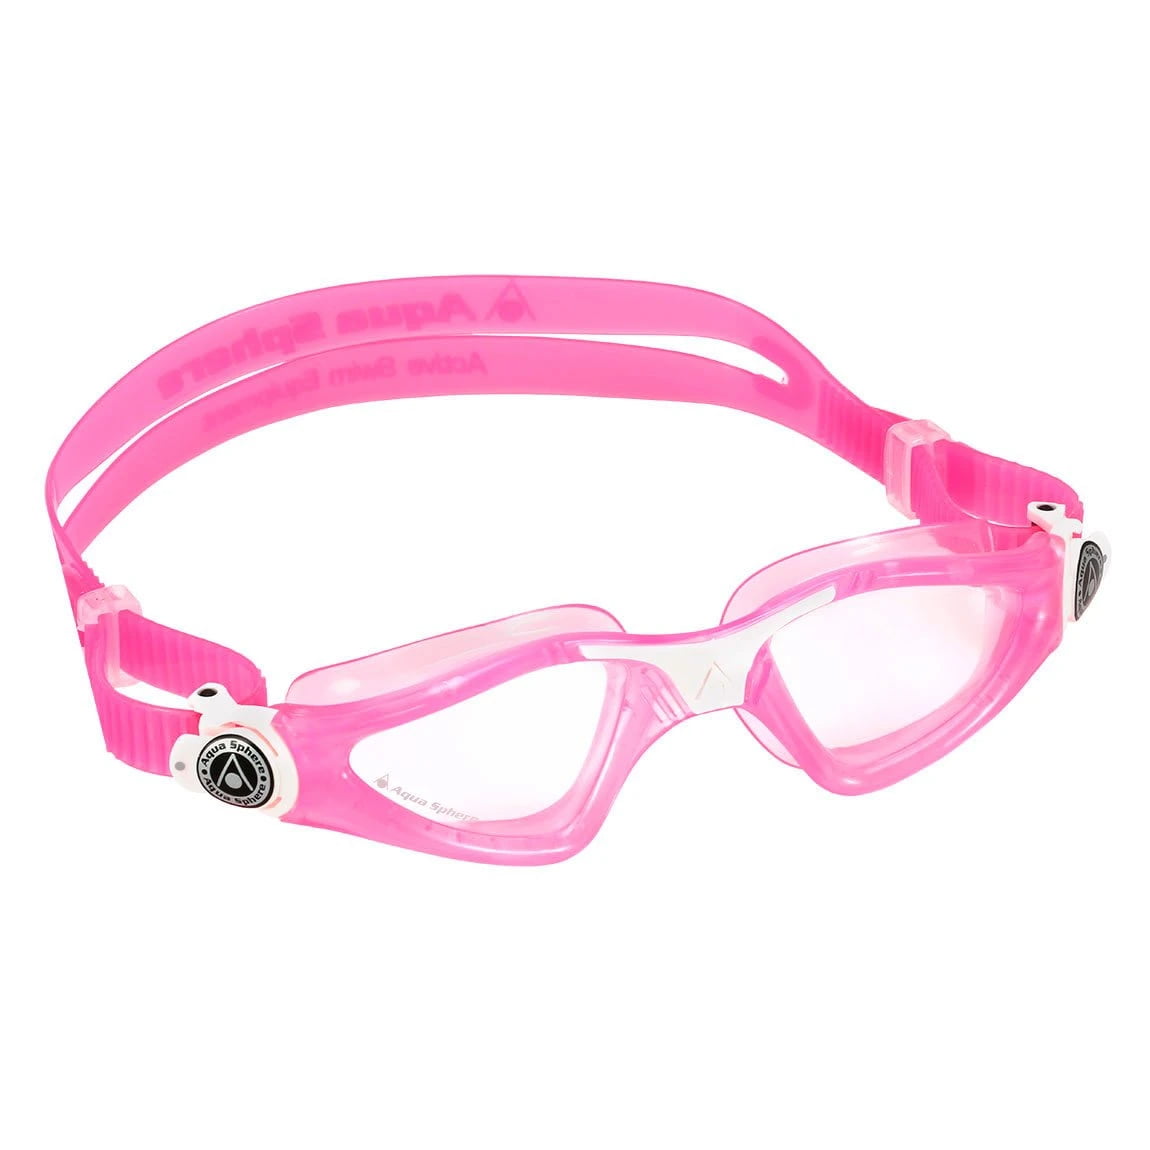 Aqua Sphere 175510 Moby Kid Swimming Goggles Pink/white/clear Lens for sale online 